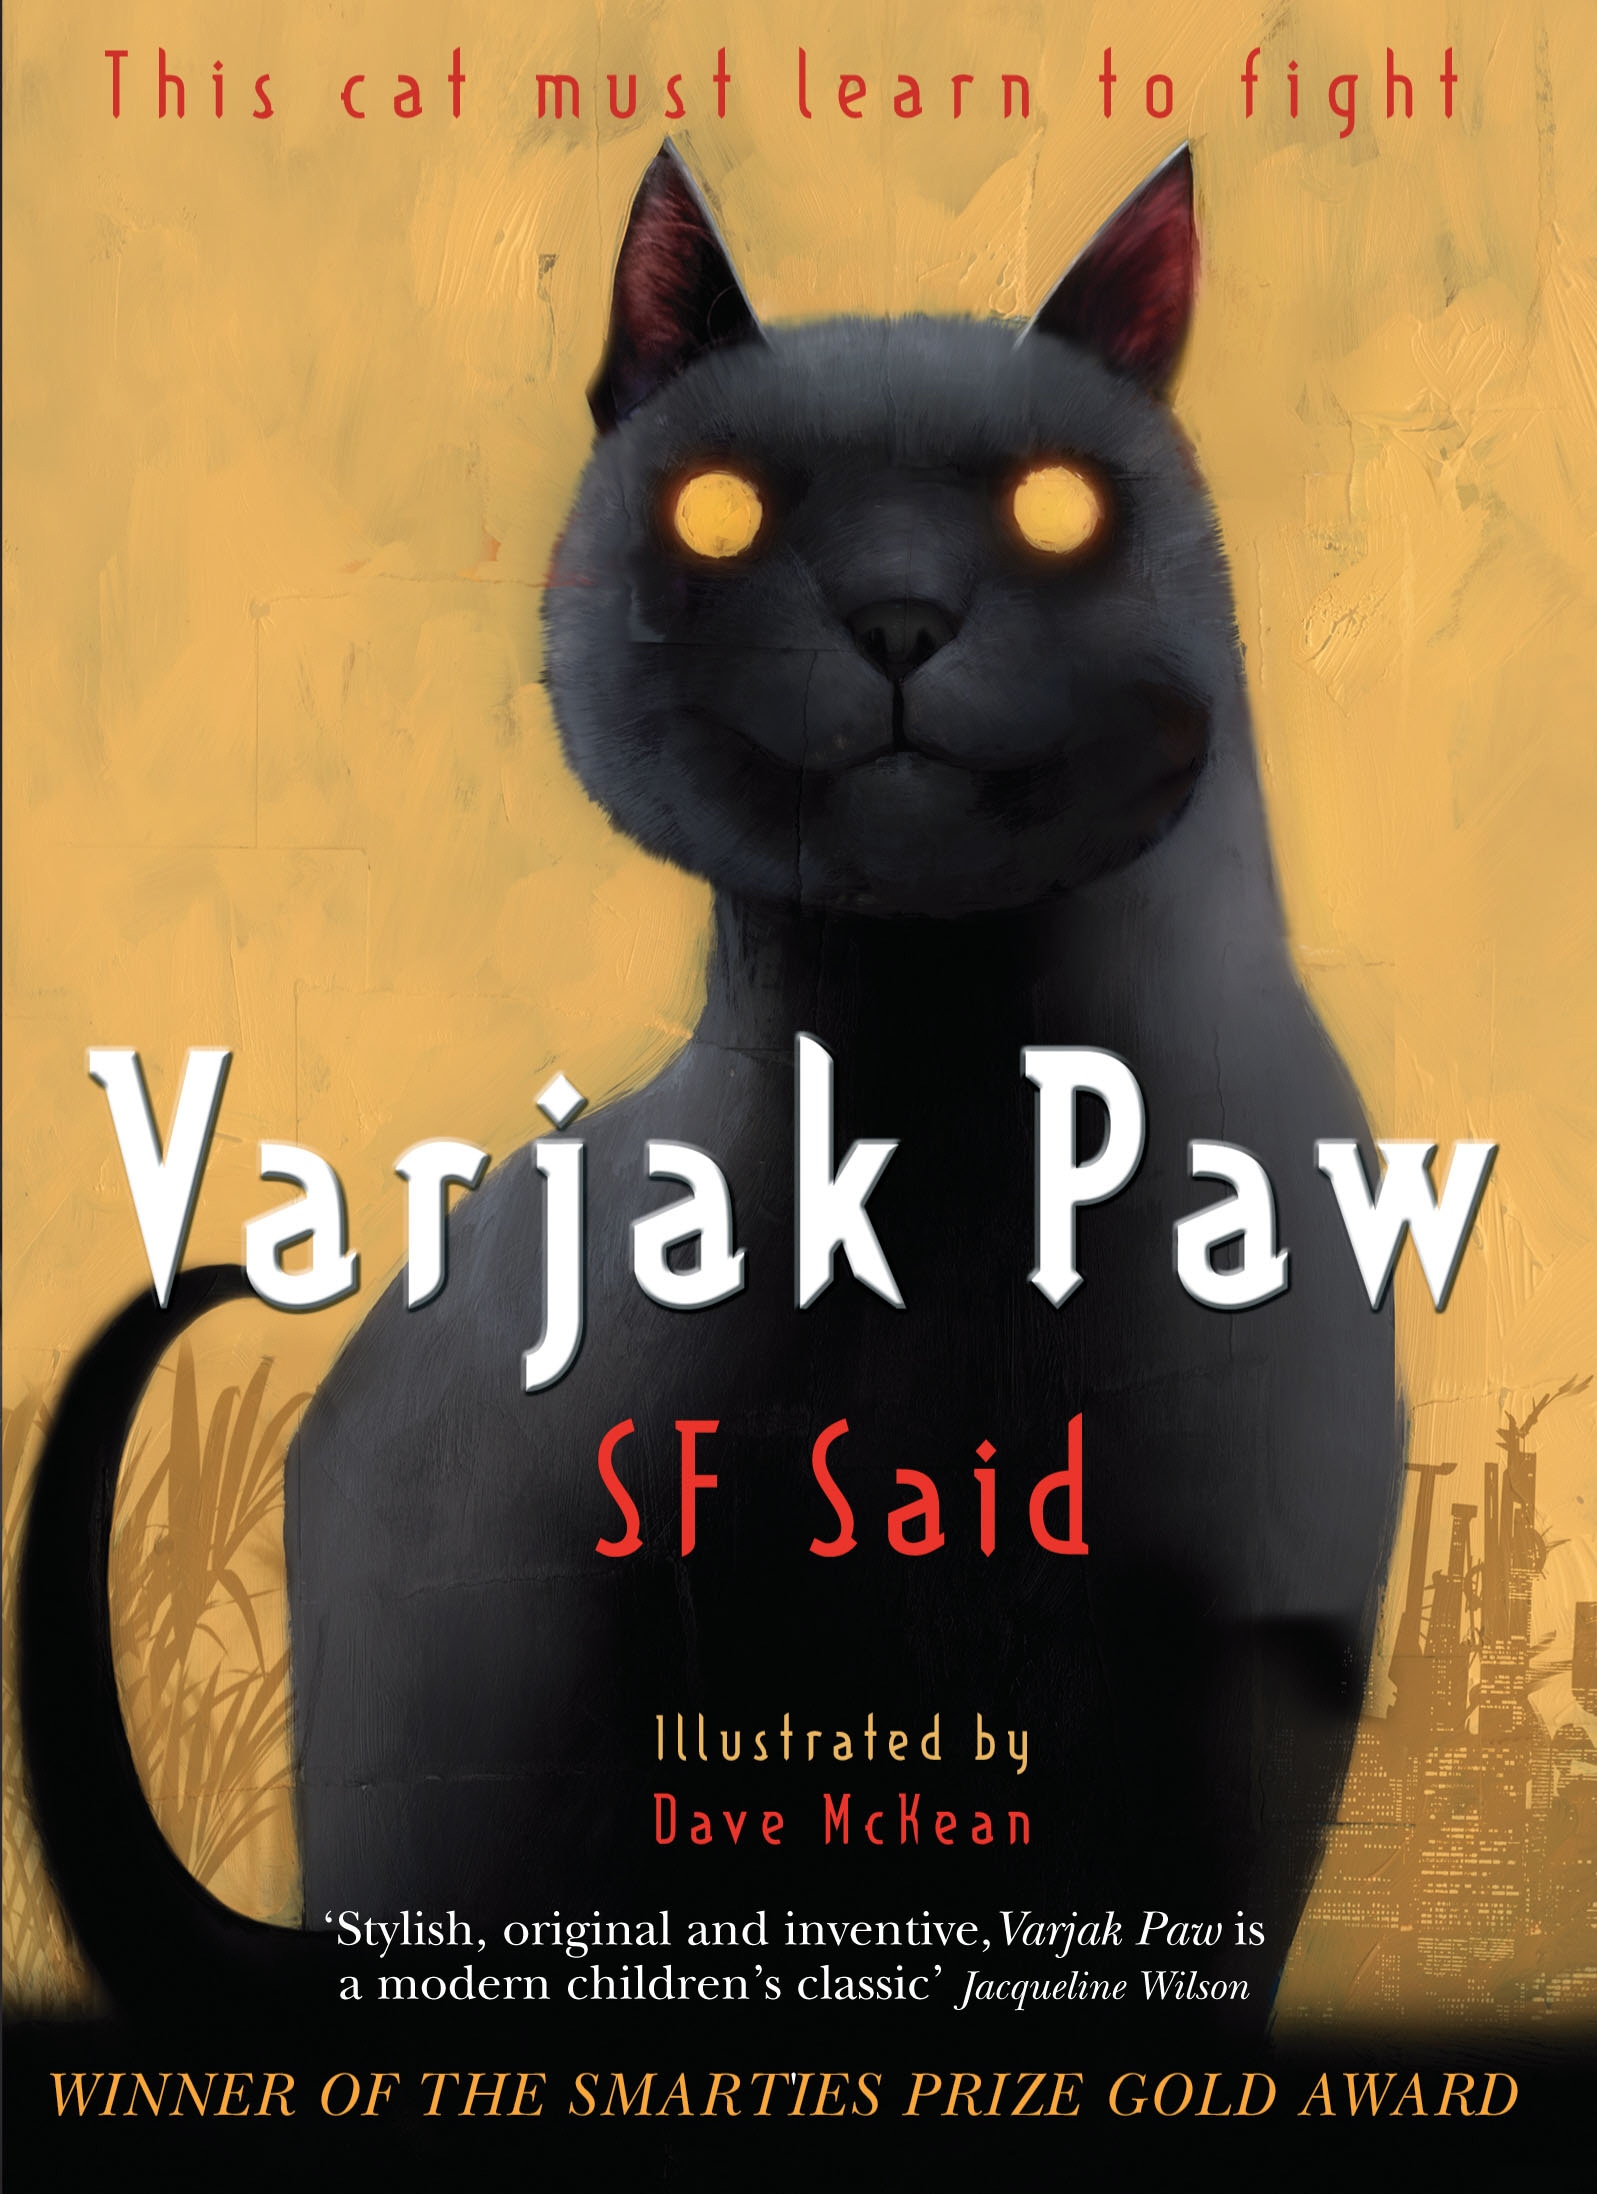 Book “Varjak Paw” by SF Said — March 13, 2014